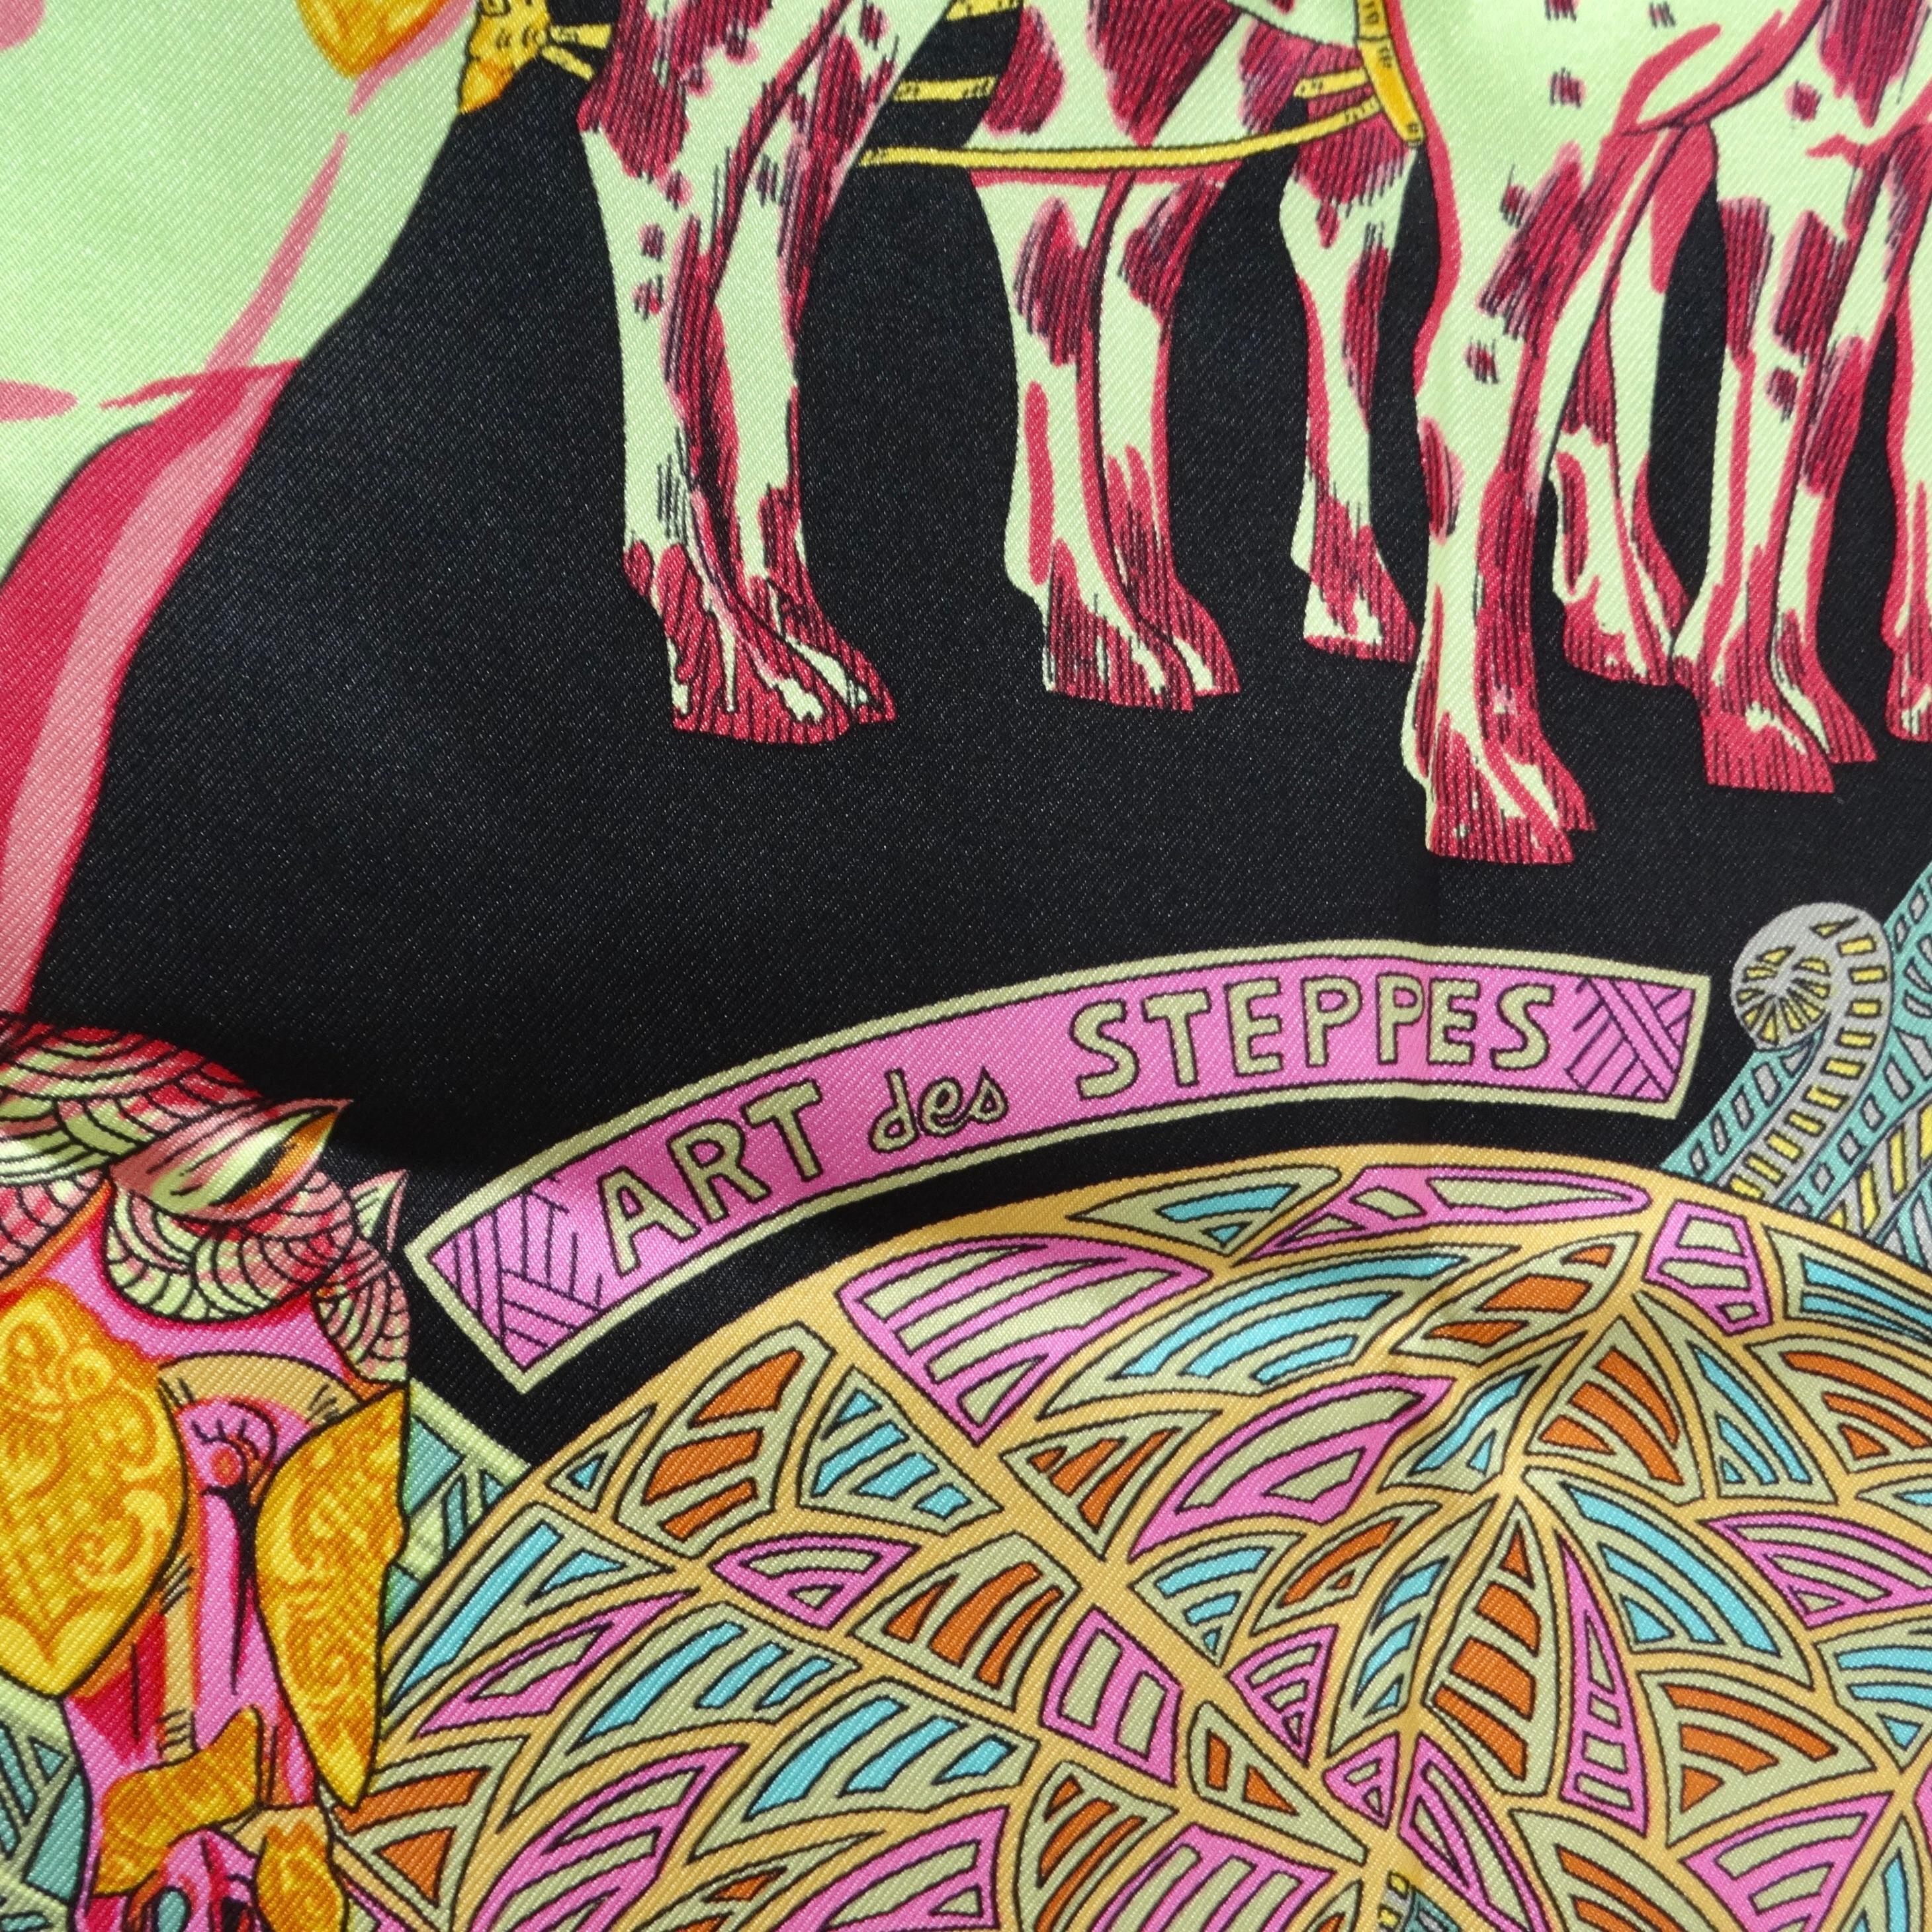 Introducing the Hermes Art Des Steppes Silk Scarf, a masterpiece of timeless elegance and vibrant artistry that is sure to elevate your style in infinite ways. This silk scarf by Hermes is a symbol of luxury and sophistication. Crafted from